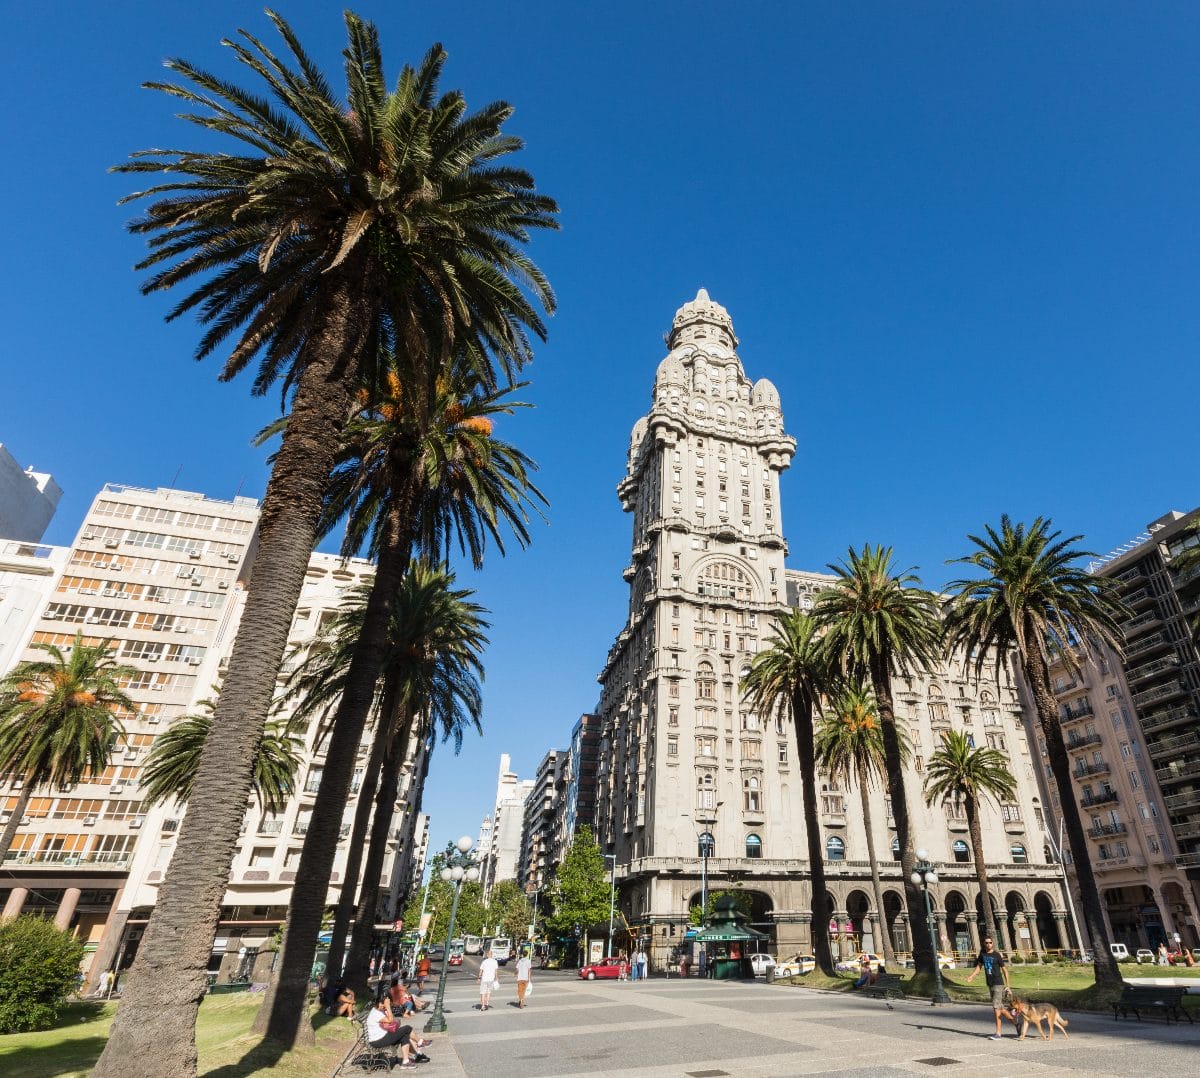 A central street in Montevideo featuring Salvo Palace (Palacio Salvo), a historical landmark building in an eclectic architectural style—predominantly Italian Gothic